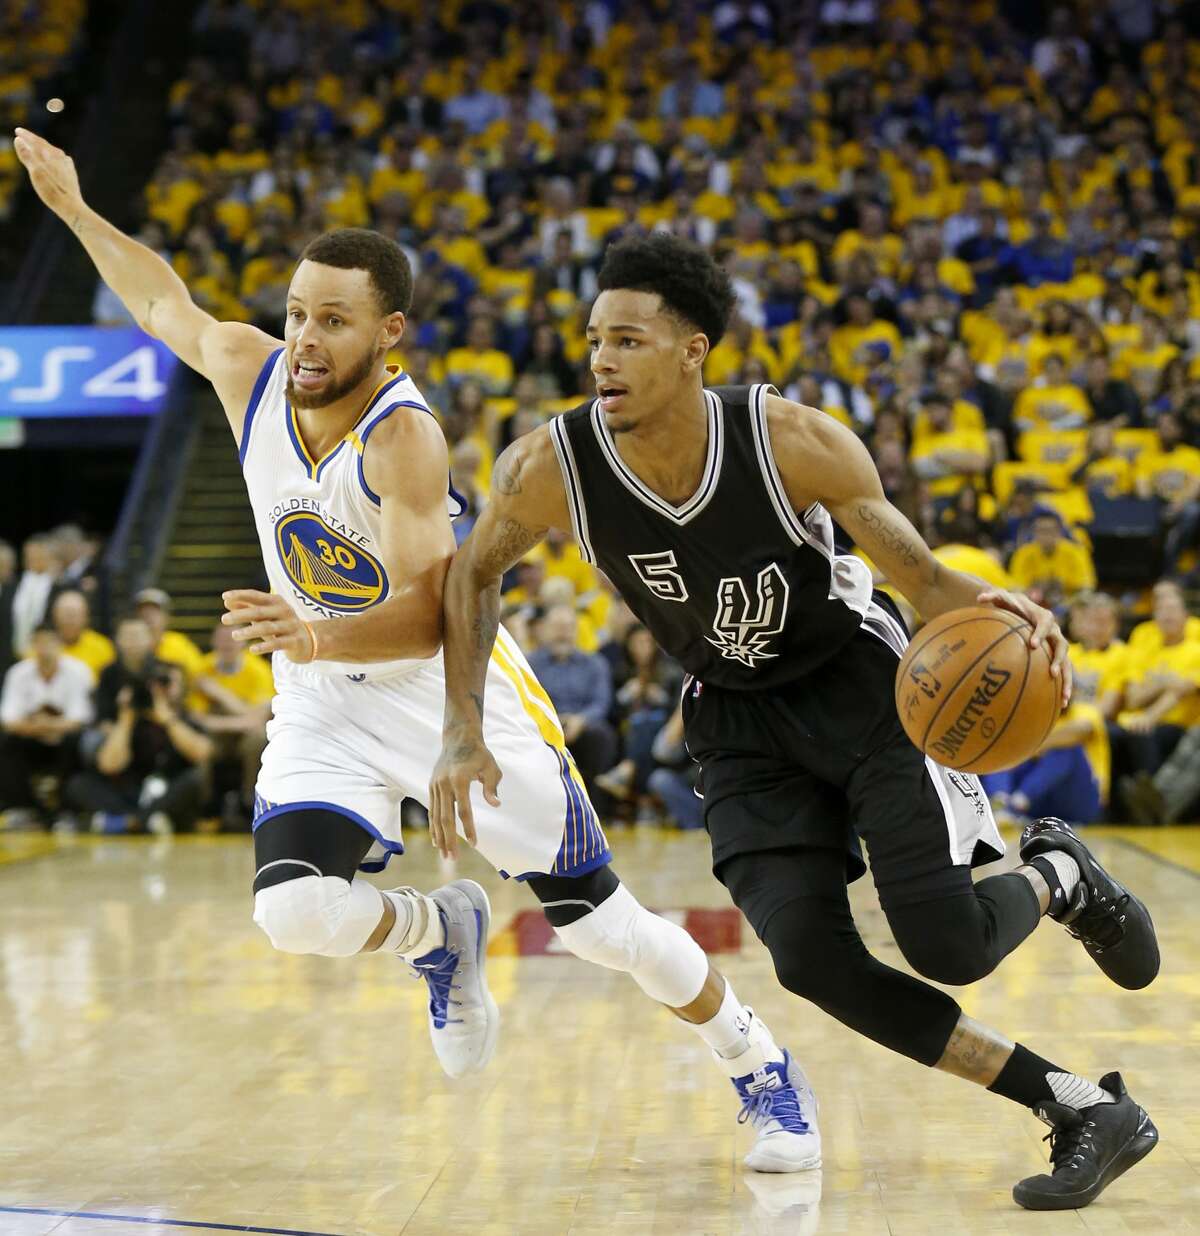 San Antonio Spurs' Dejounte Murray looks for room around Golden State Warriors' Stephen Curry during first half action in Game 2 of the Western Conference Finals held Tuesday May 16, 2017 at Oracle Arena in Oakland, CA.